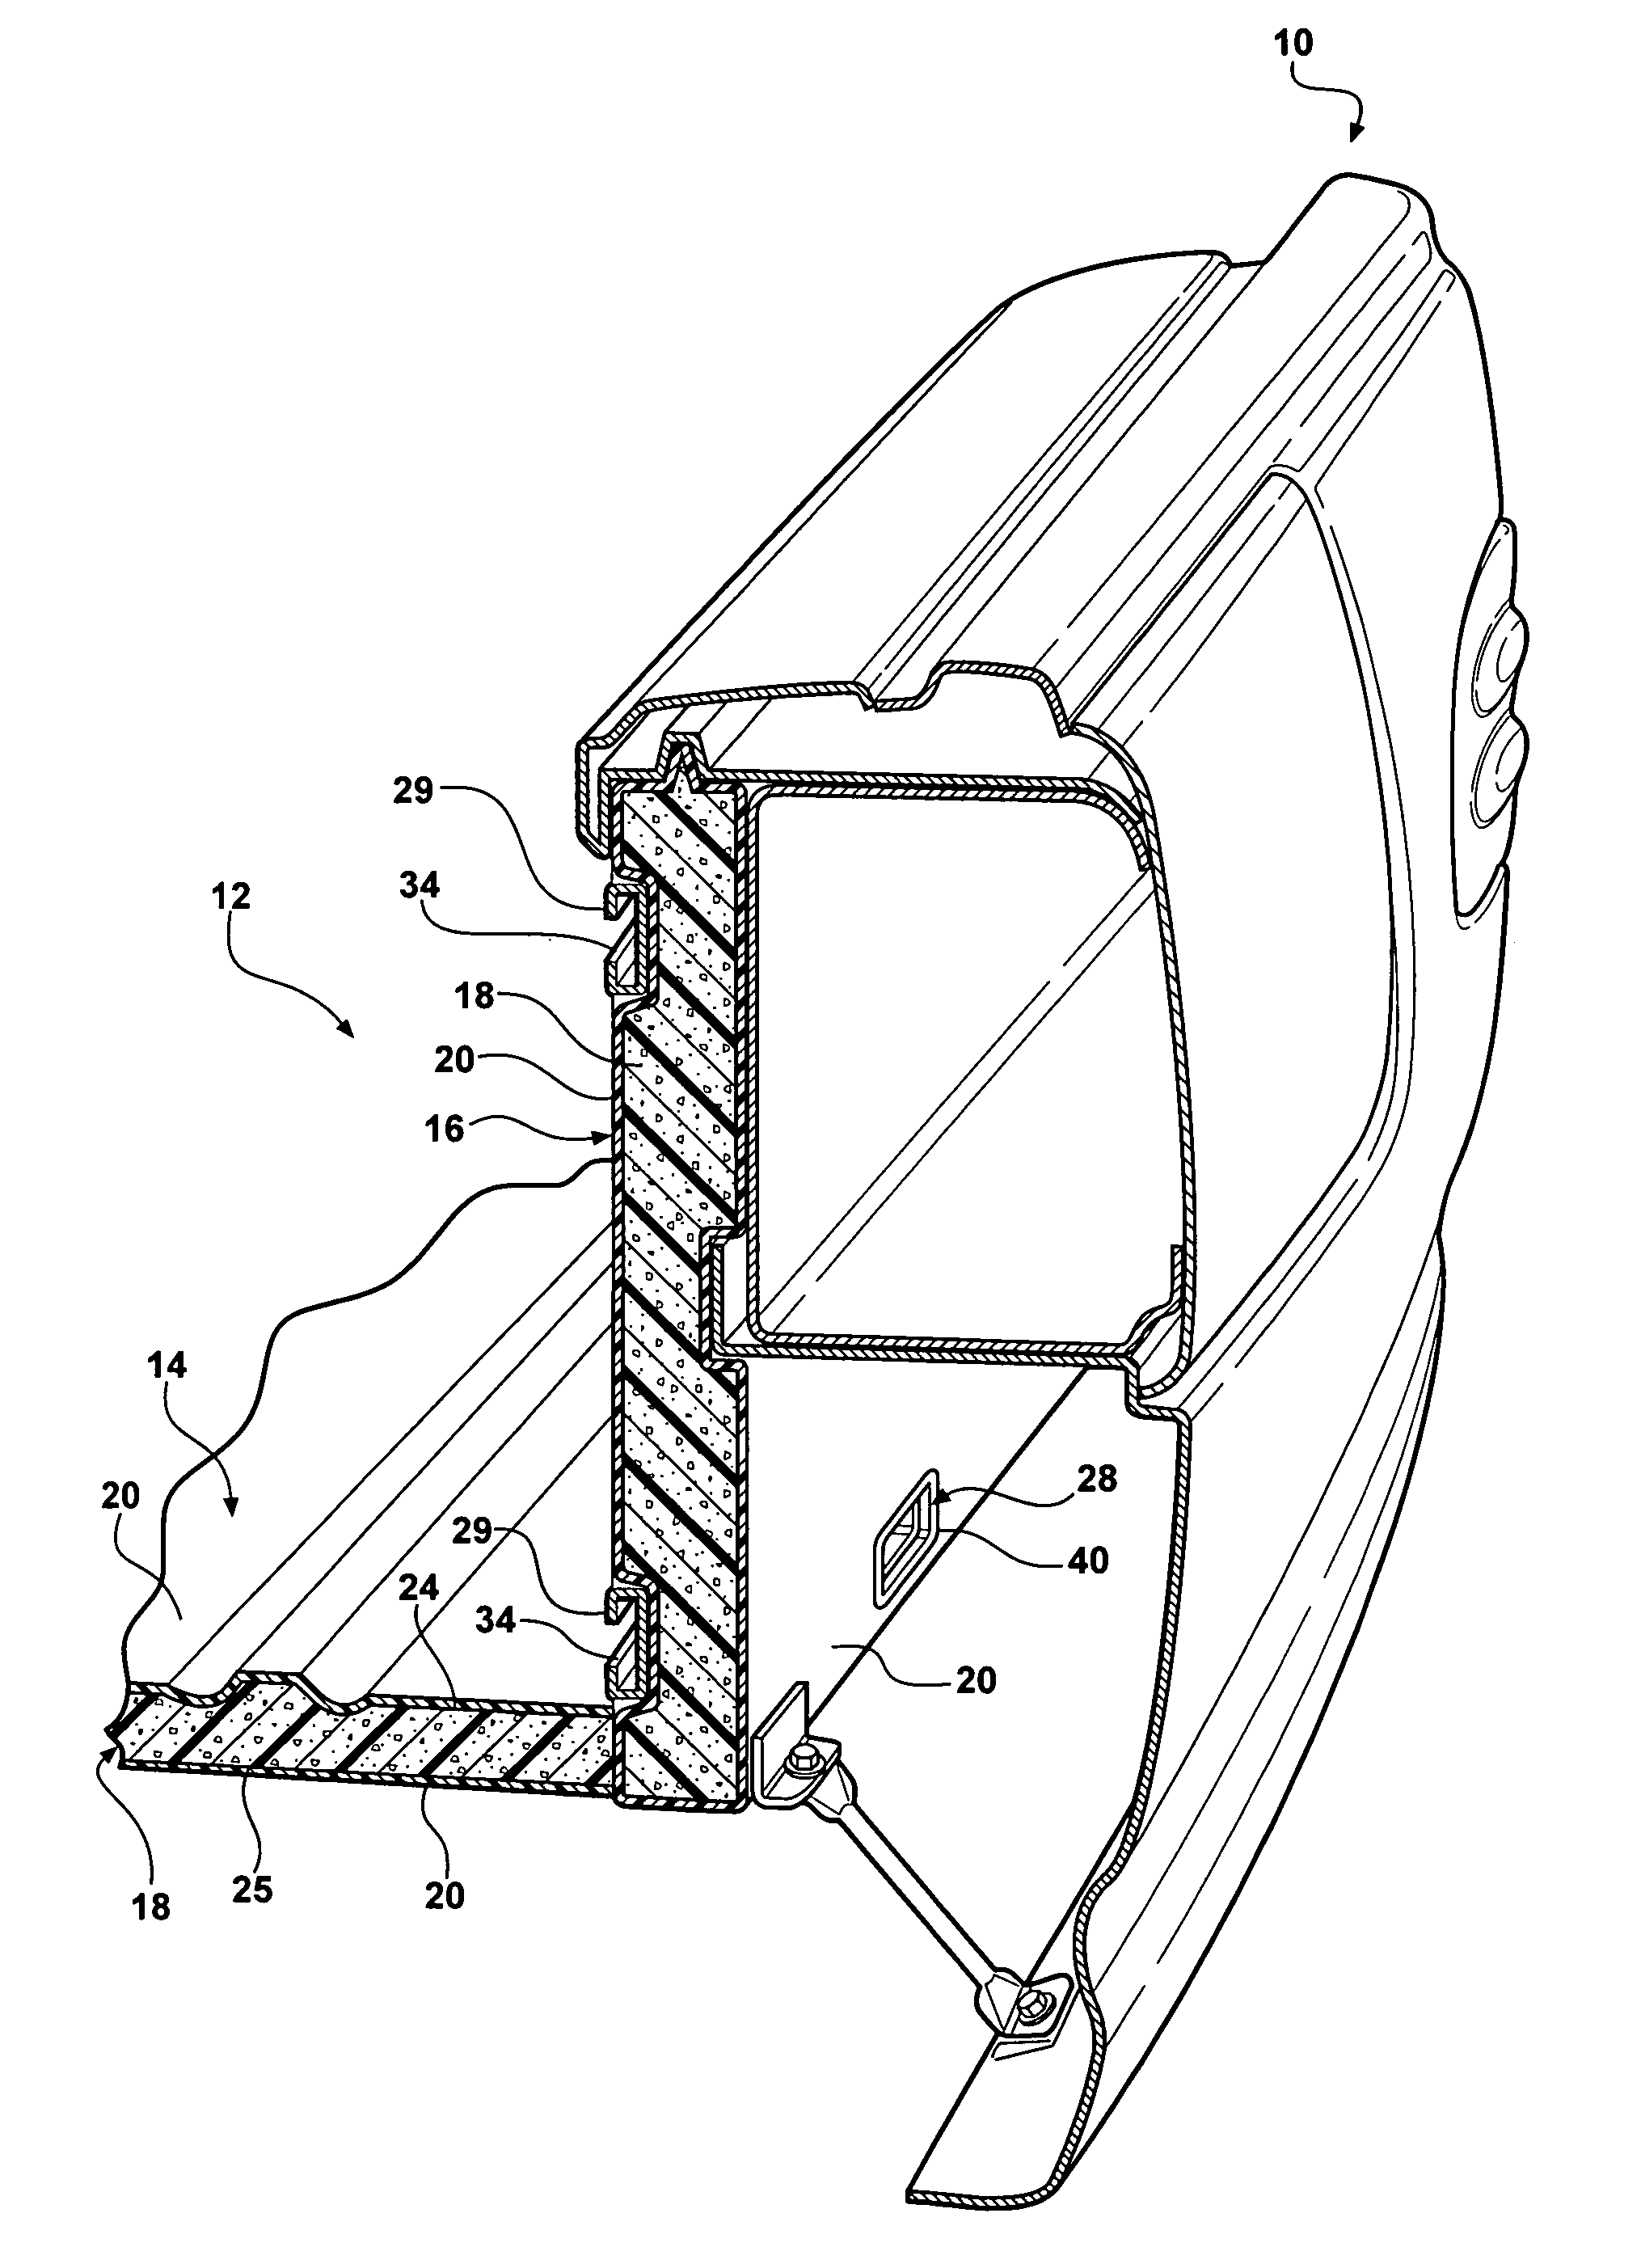 Vehicle panels and their method of construction